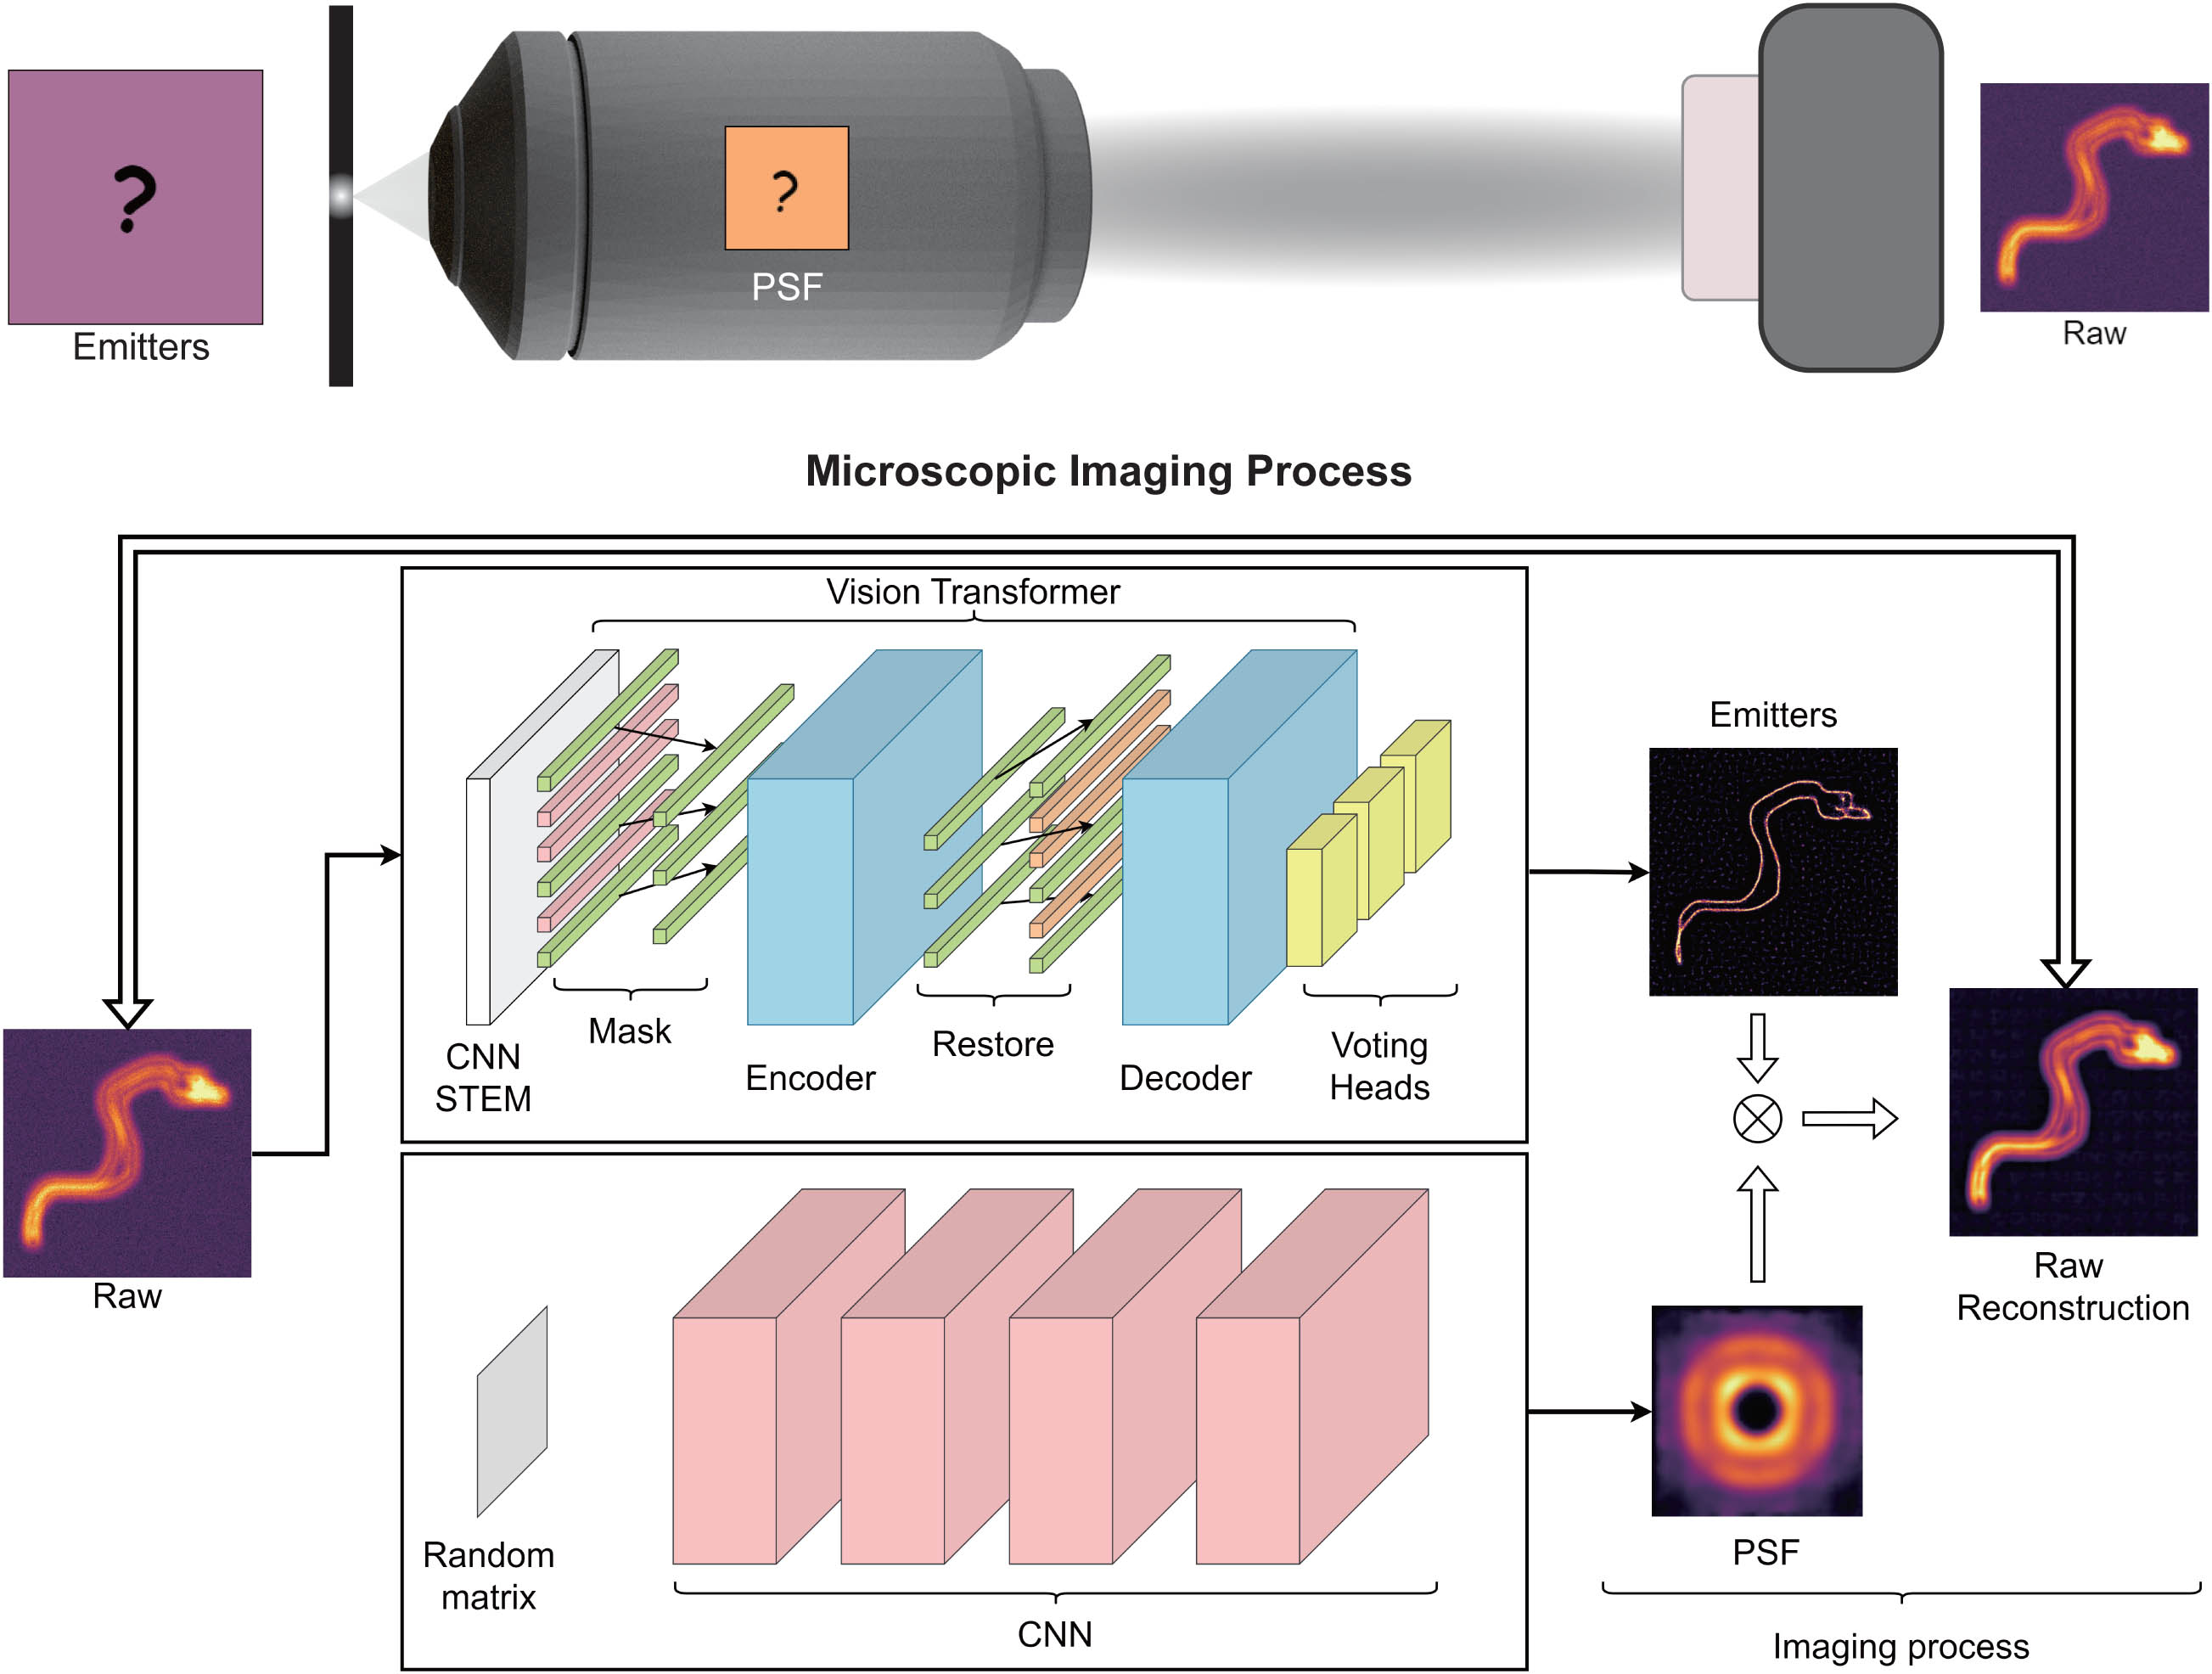 PiMAE overview. PiMAE, a physics-informed masked autoencoder, is proposed to learn the imaging mechanism of an optical microscope.